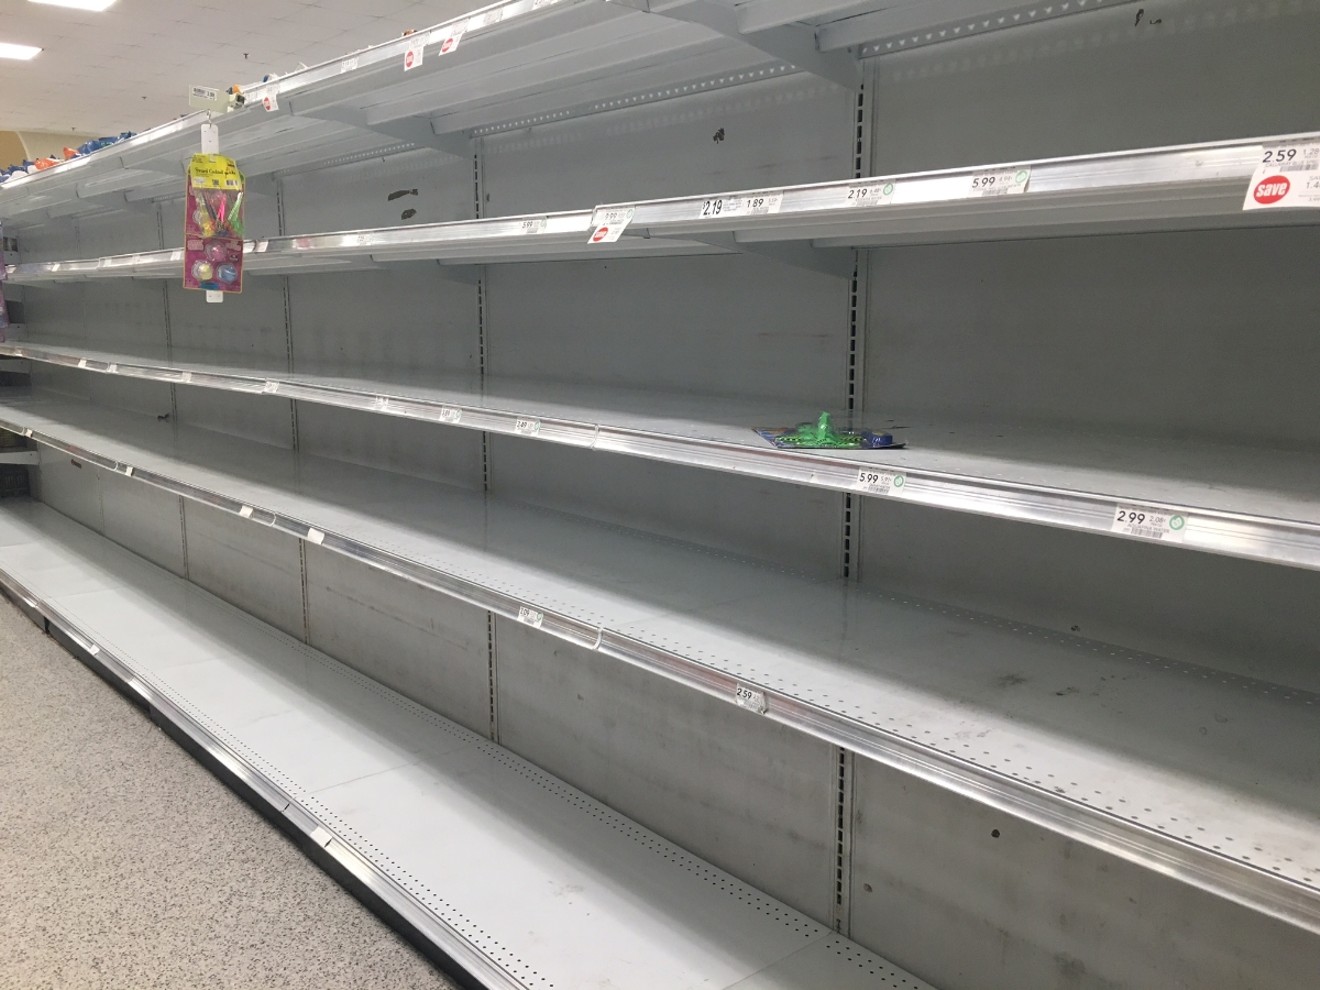 Don't panic if the water aisle looks like this. Publix plans to restock.